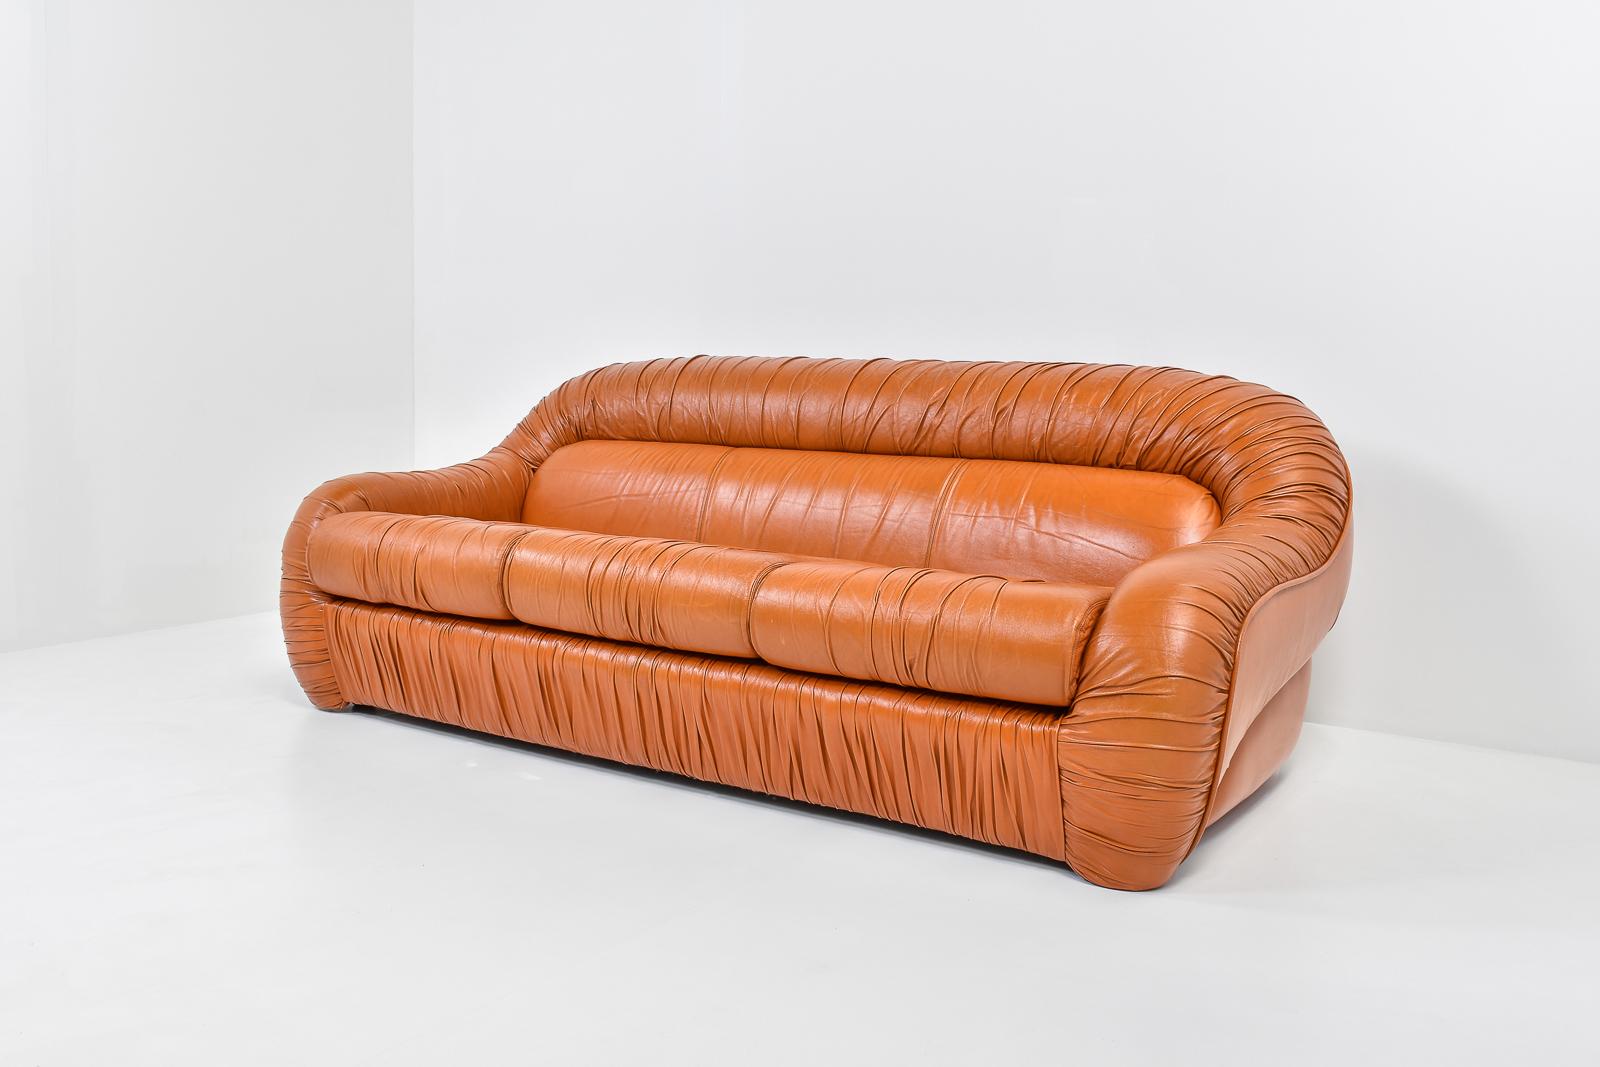 Very interesting 3-seater sofa in rich orange-cognac leather. The leather is in excellent condition and shows almost no traces of wear. The leather is ruched with a lot of detail. Very beautiful Italian space age sofa, which is exemplary for Italian